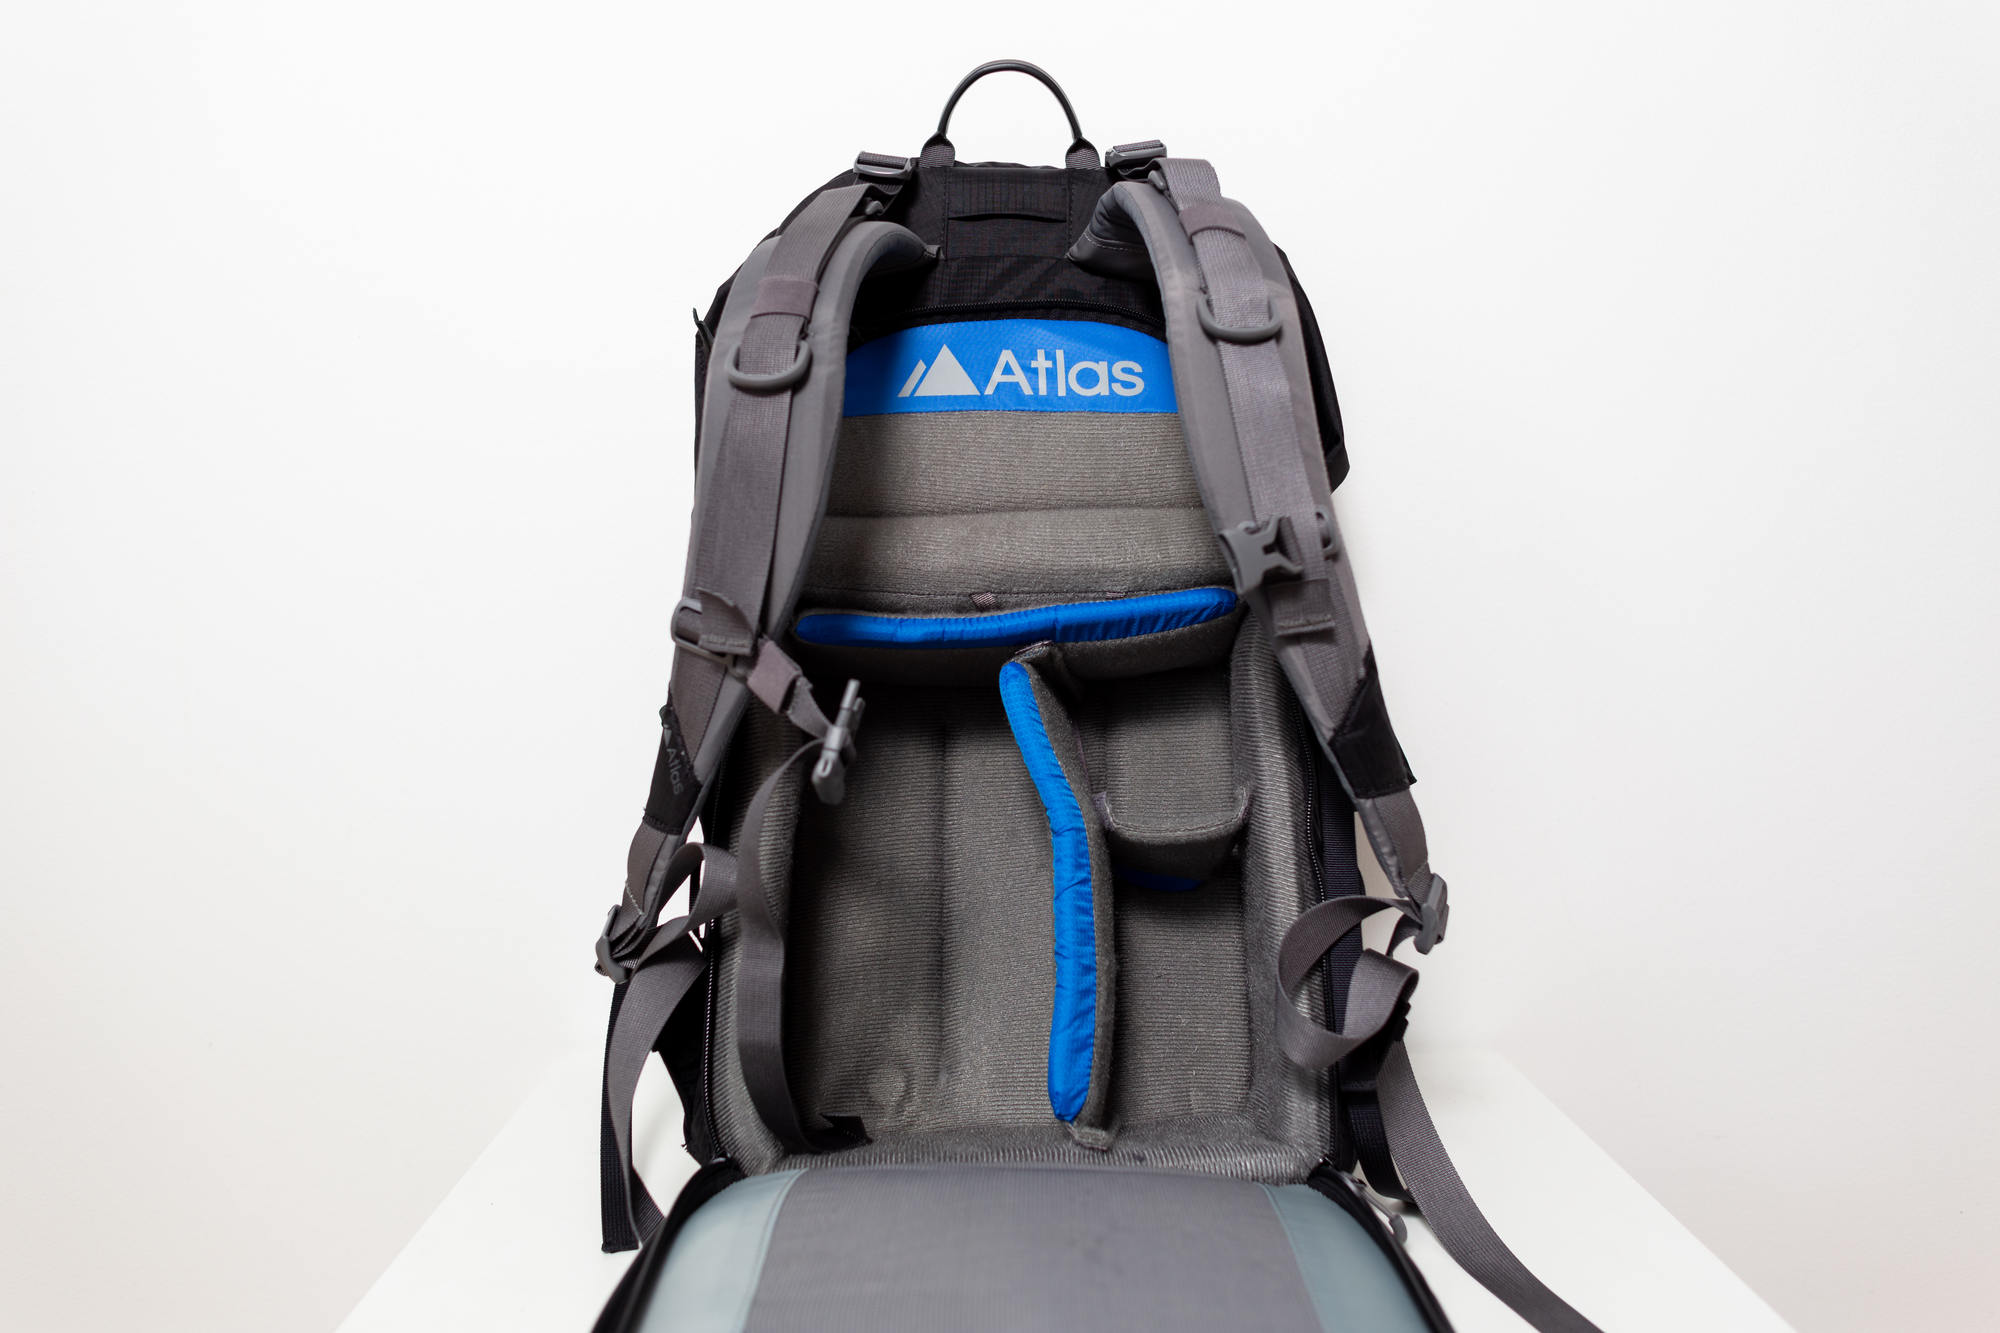 camera-backpack-review-atlas-athlete-10